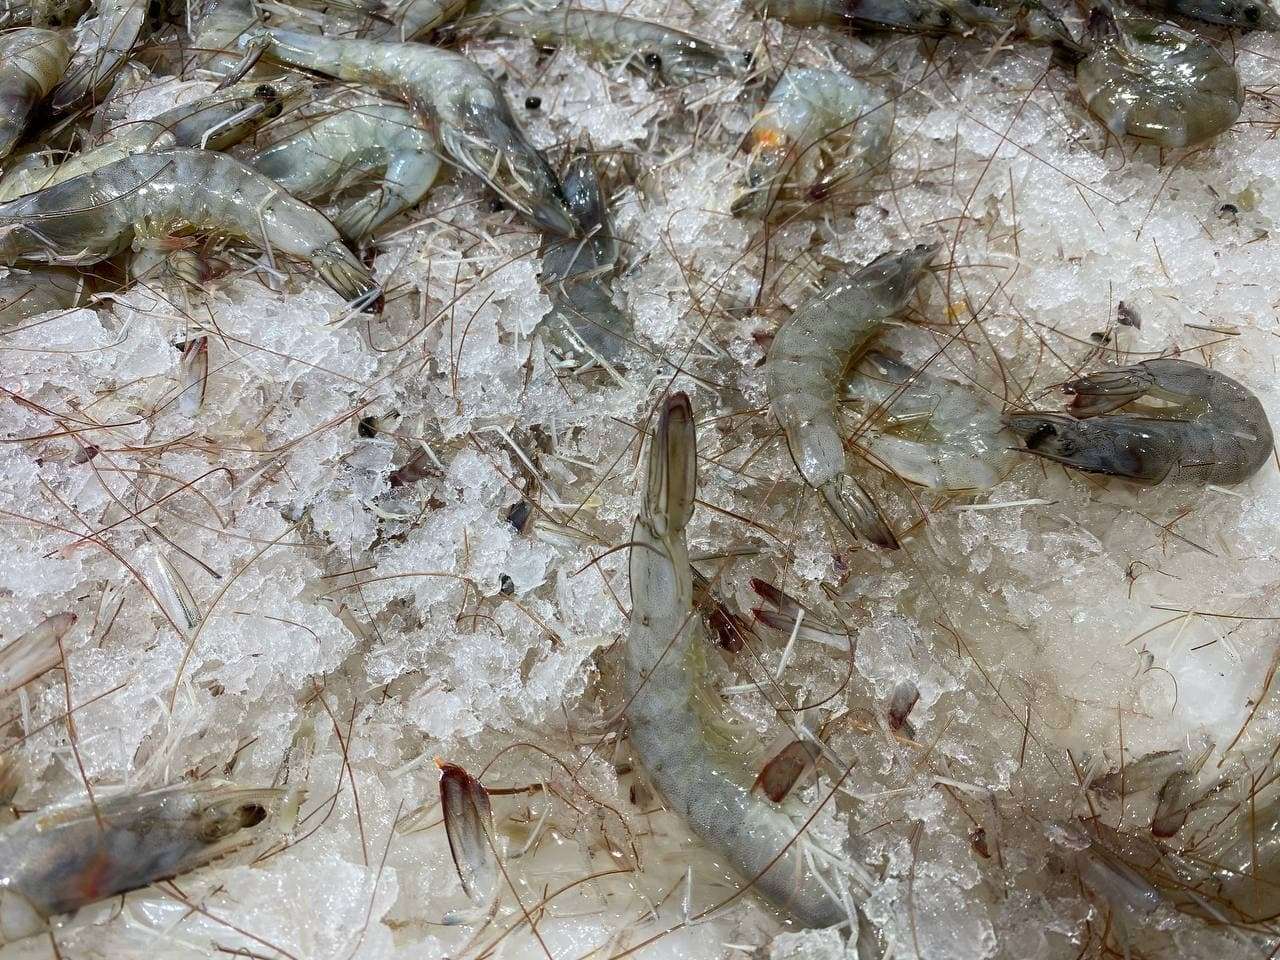 PRAWNS IN ICE puzzle online from photo